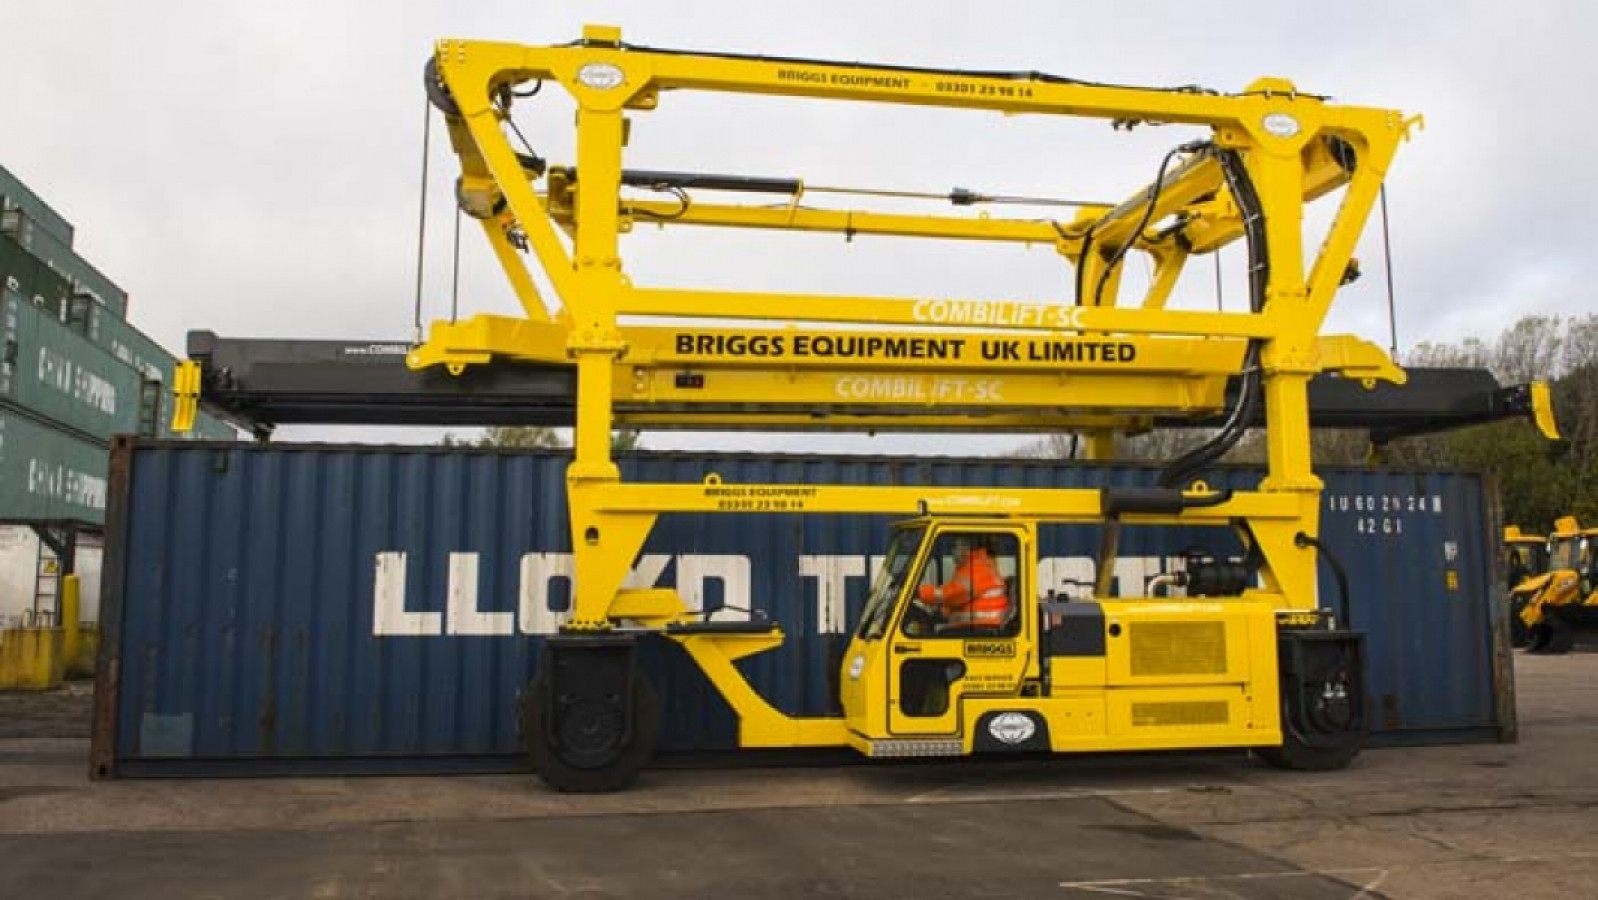 BAP choose container handler from Briggs Equipment...